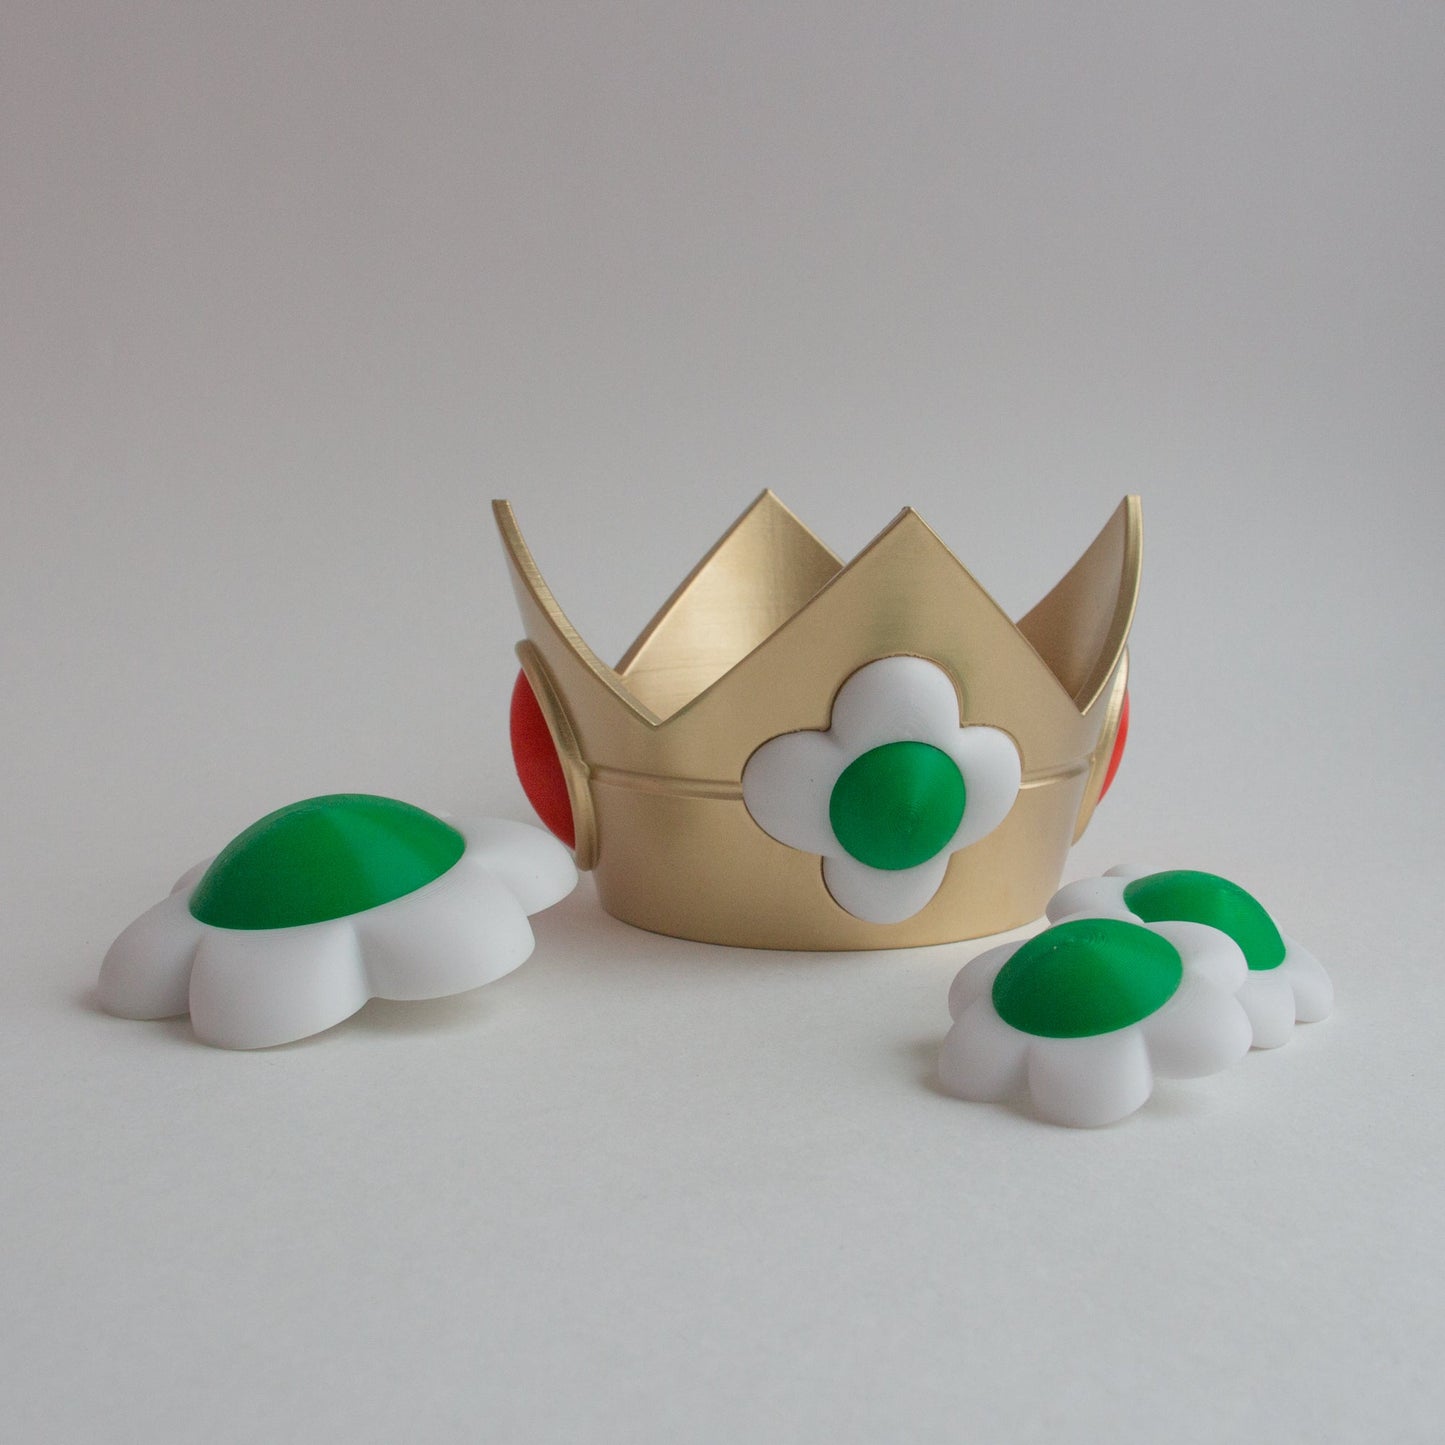 Princess Daisy Accessories – Crown, brooch, earrings from Super Mario Bros video game